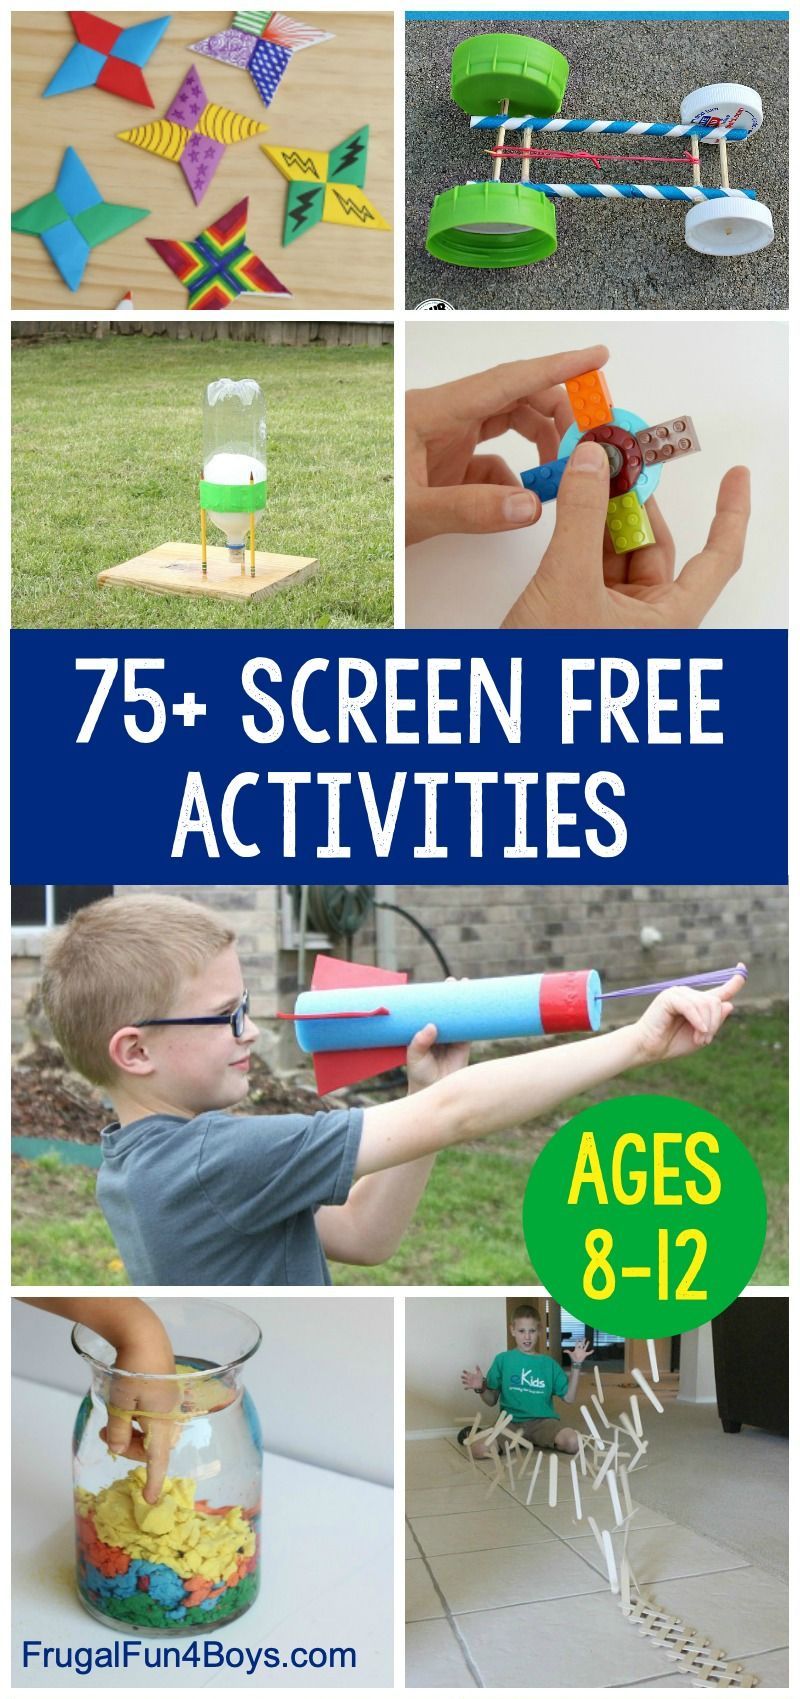 75+ Screen Free Activities for Kids -   19 diy projects for kids boys fun crafts ideas